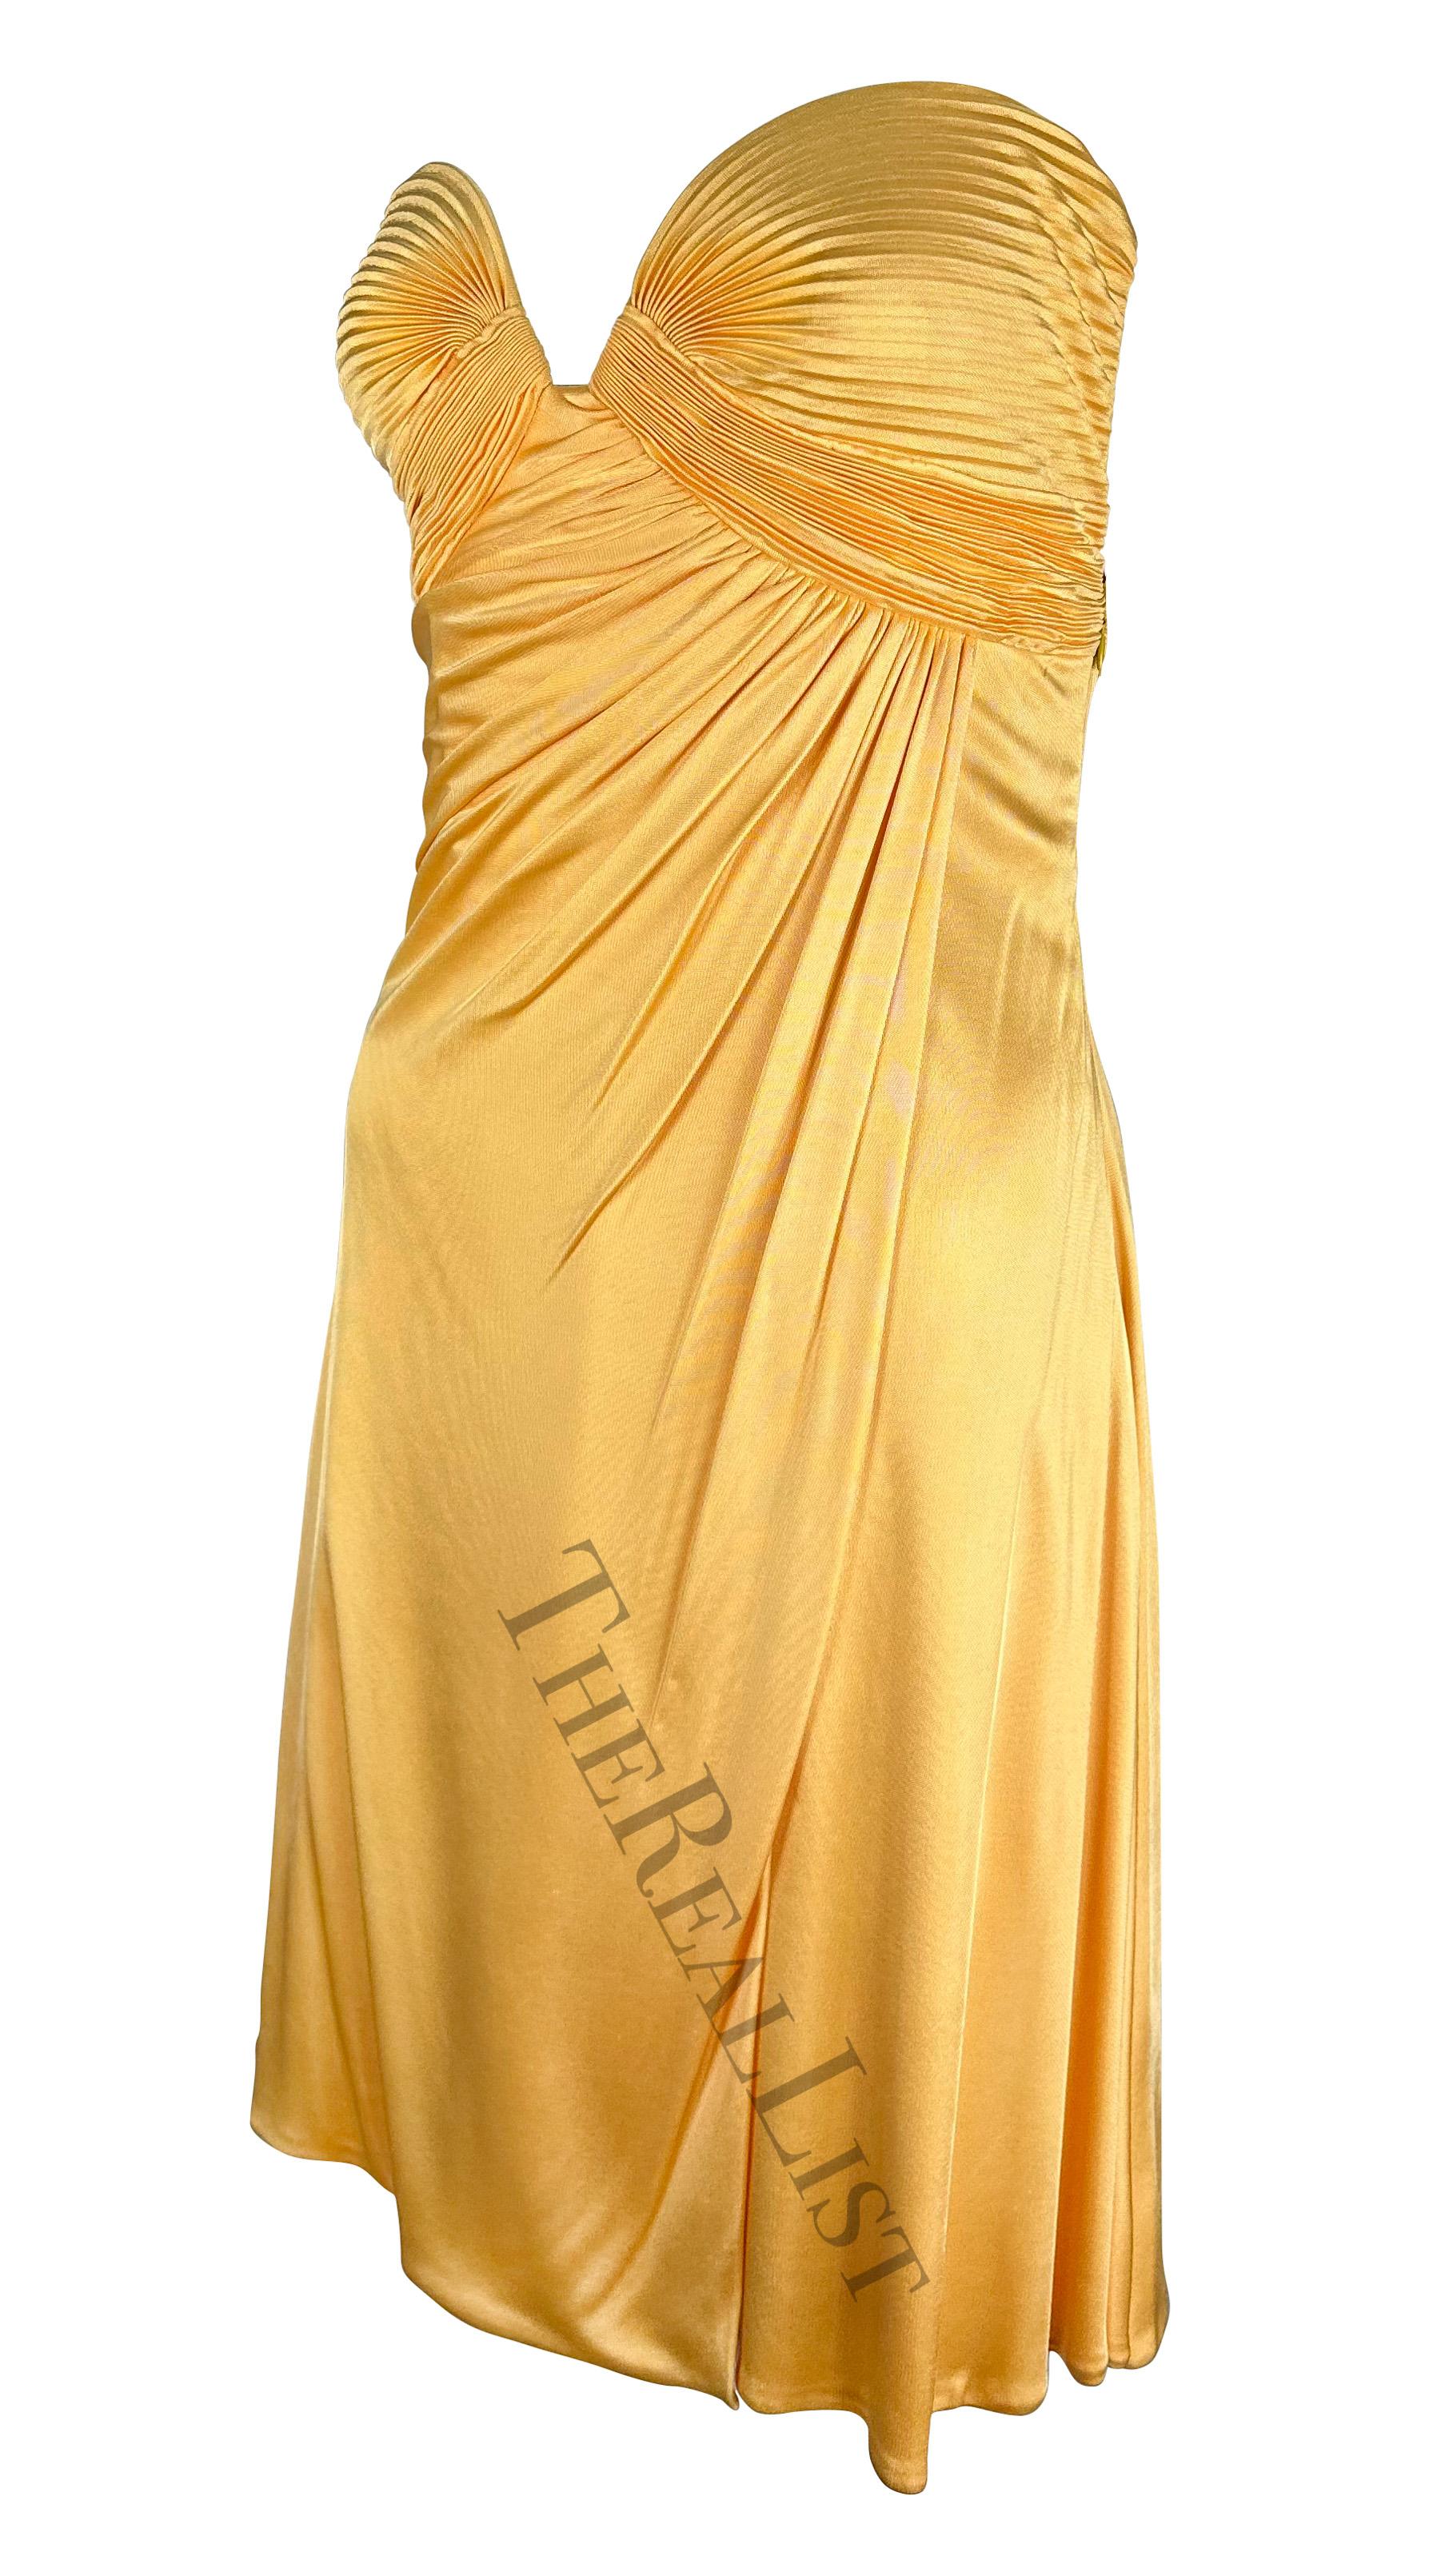 S/S 1995 Gianni Versace Couture Light Orange Yellow Flare Strapless Dress For Sale 1